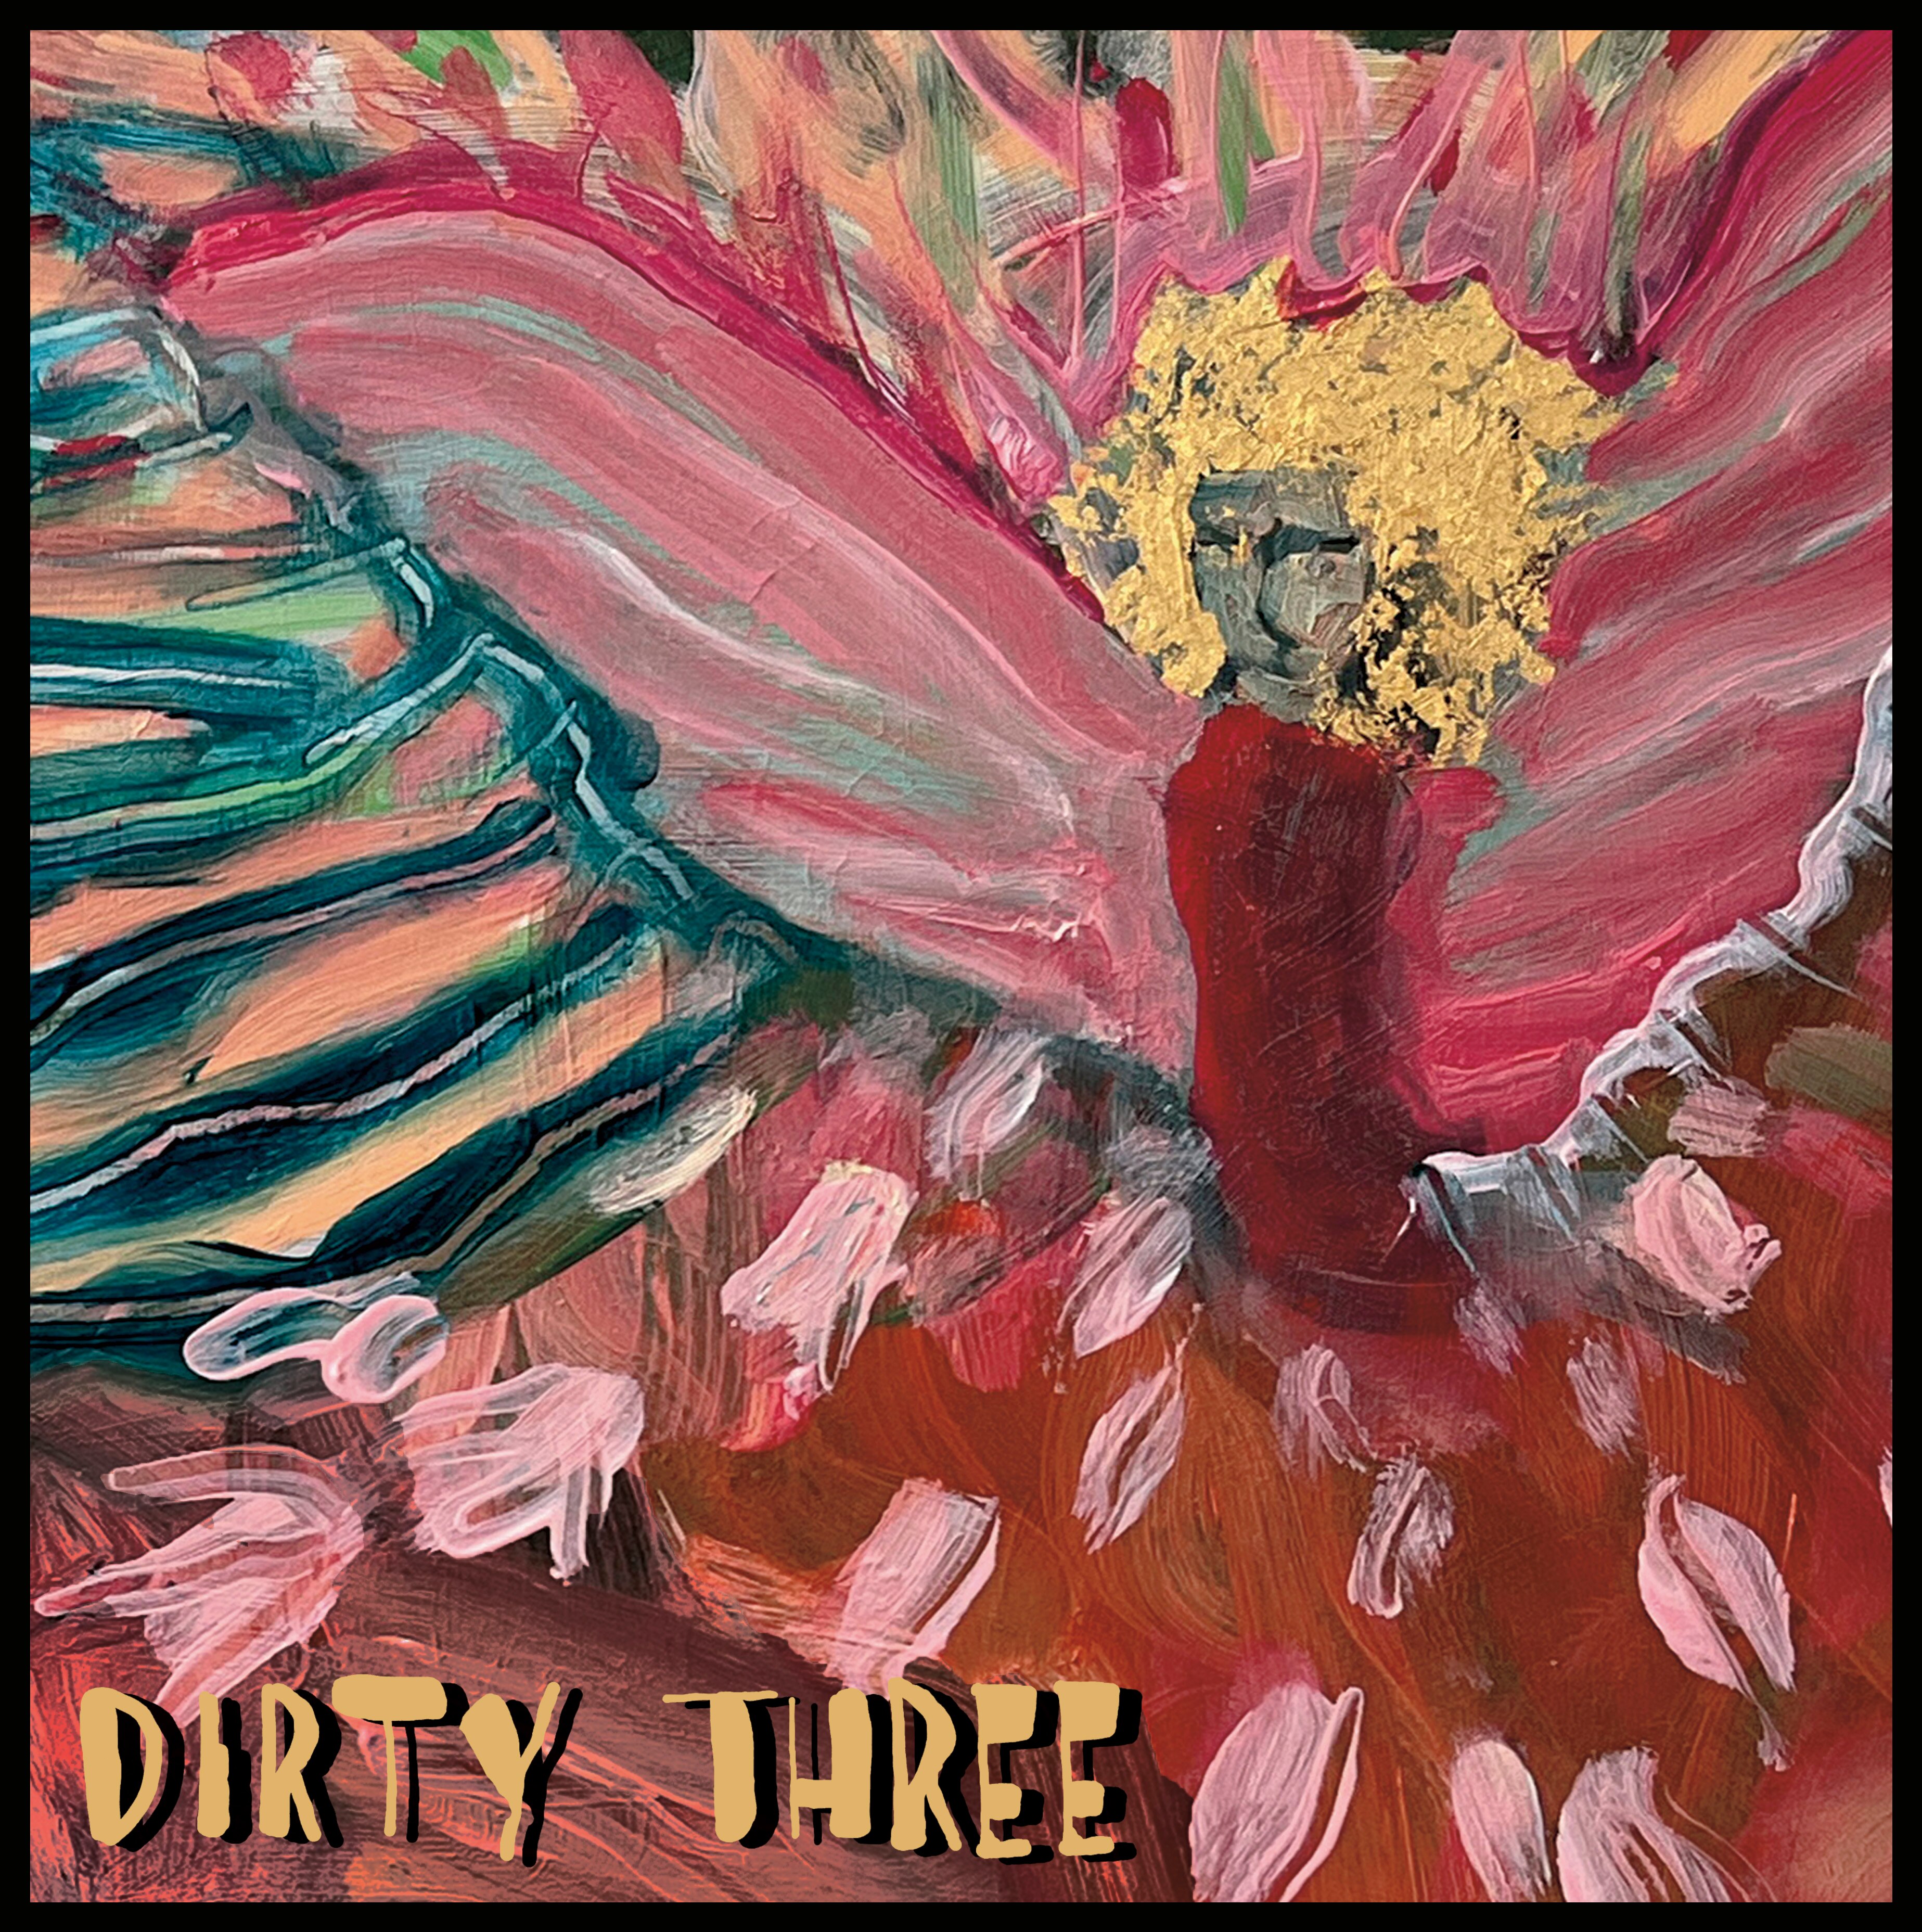 A Mick Turner painting in red and pink hues of a winged figure with a radiant yellow mane and text reading: Dirty Three